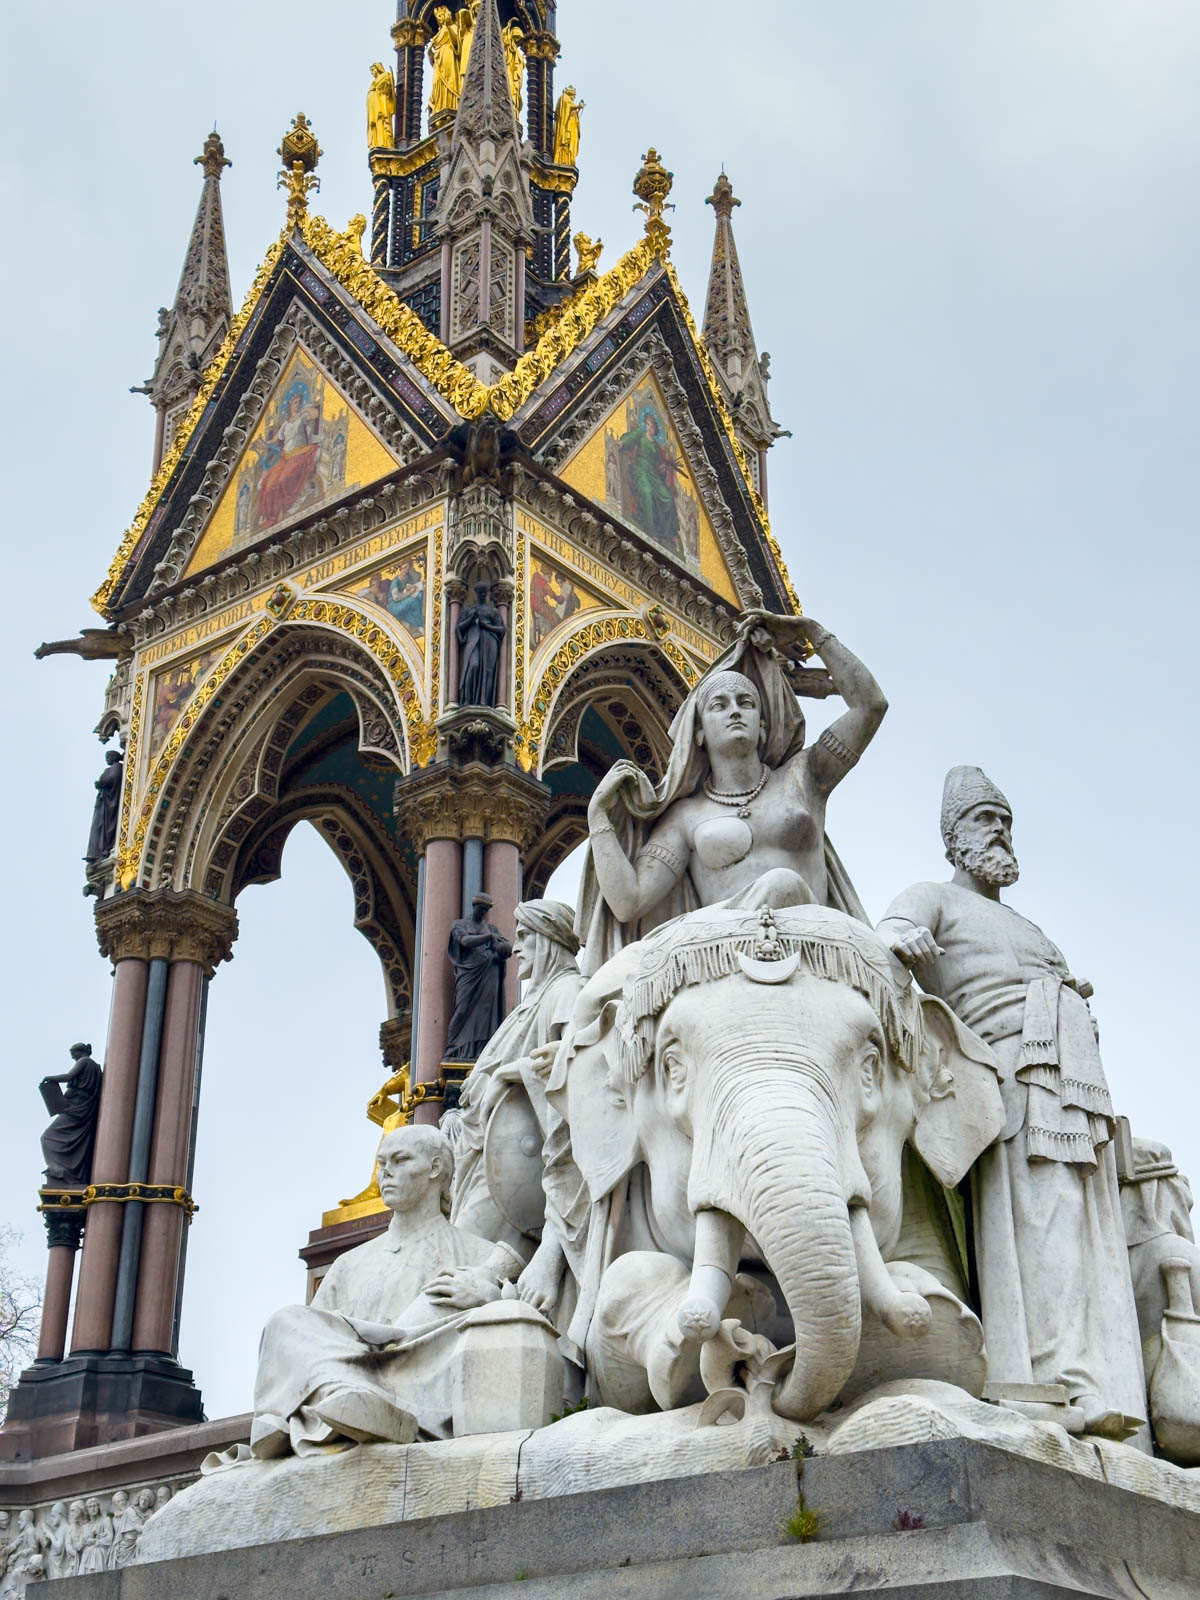 The top of the Prince Albert Memorial is gilded. A statue feating several figures is in the foreground.